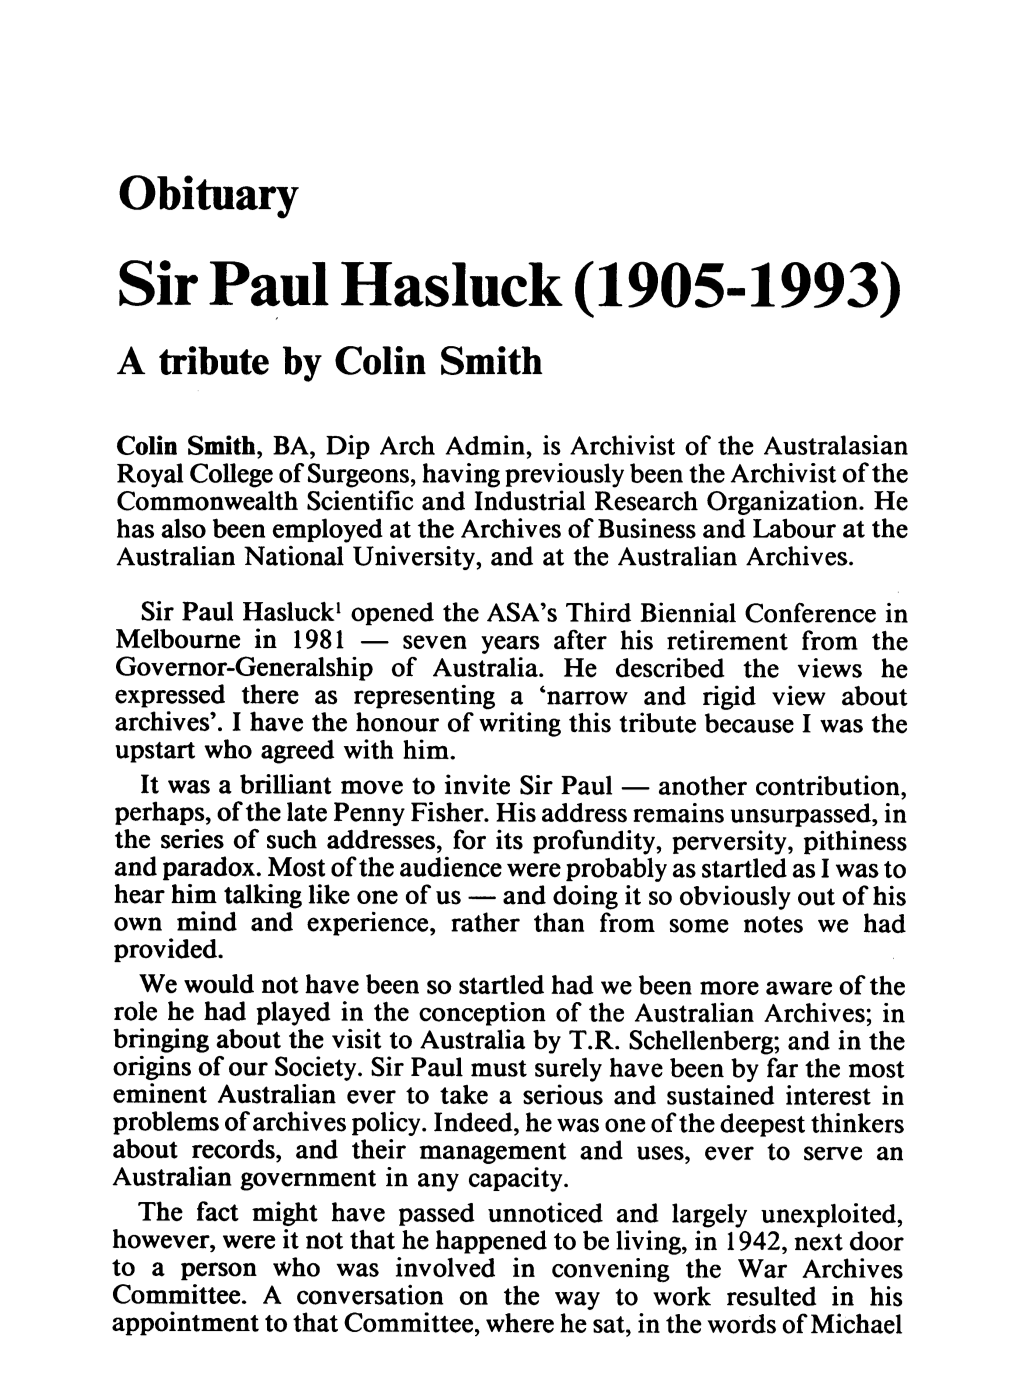 Sir Paul Hasluck (1905-1993) a Tribute by Colin Smith